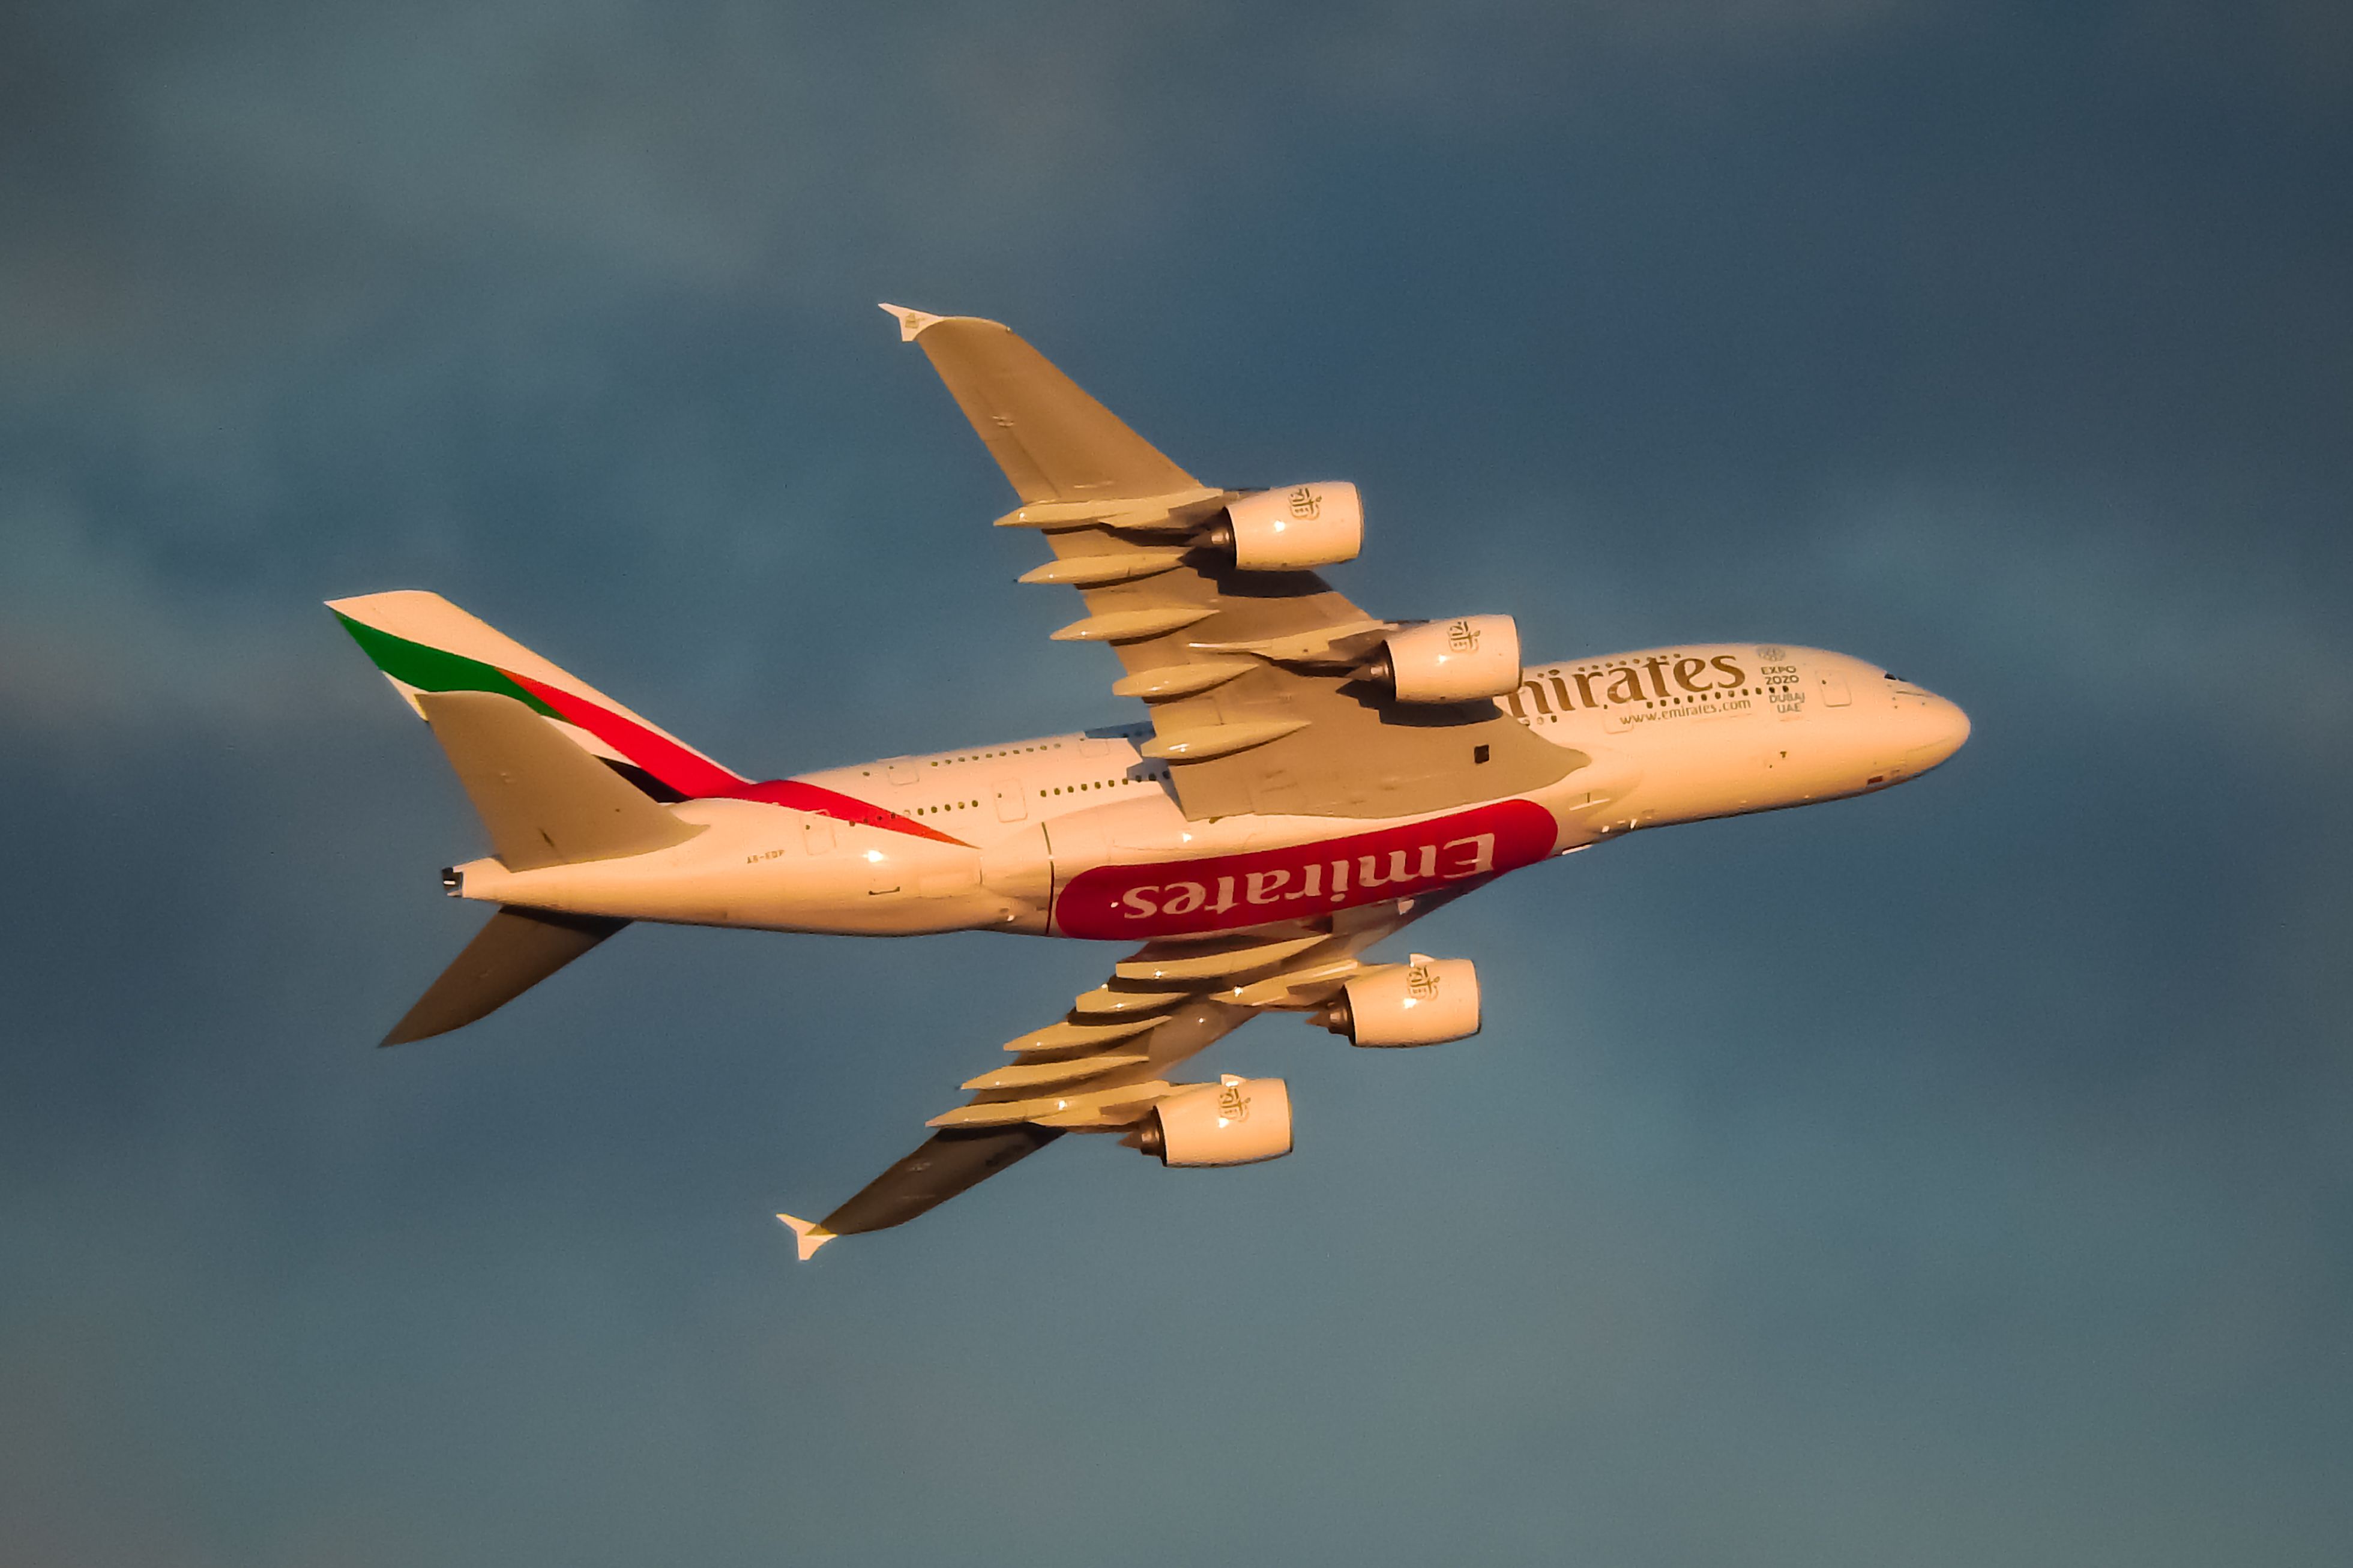 An Emirates Airbus A380-800 flying in the sky.